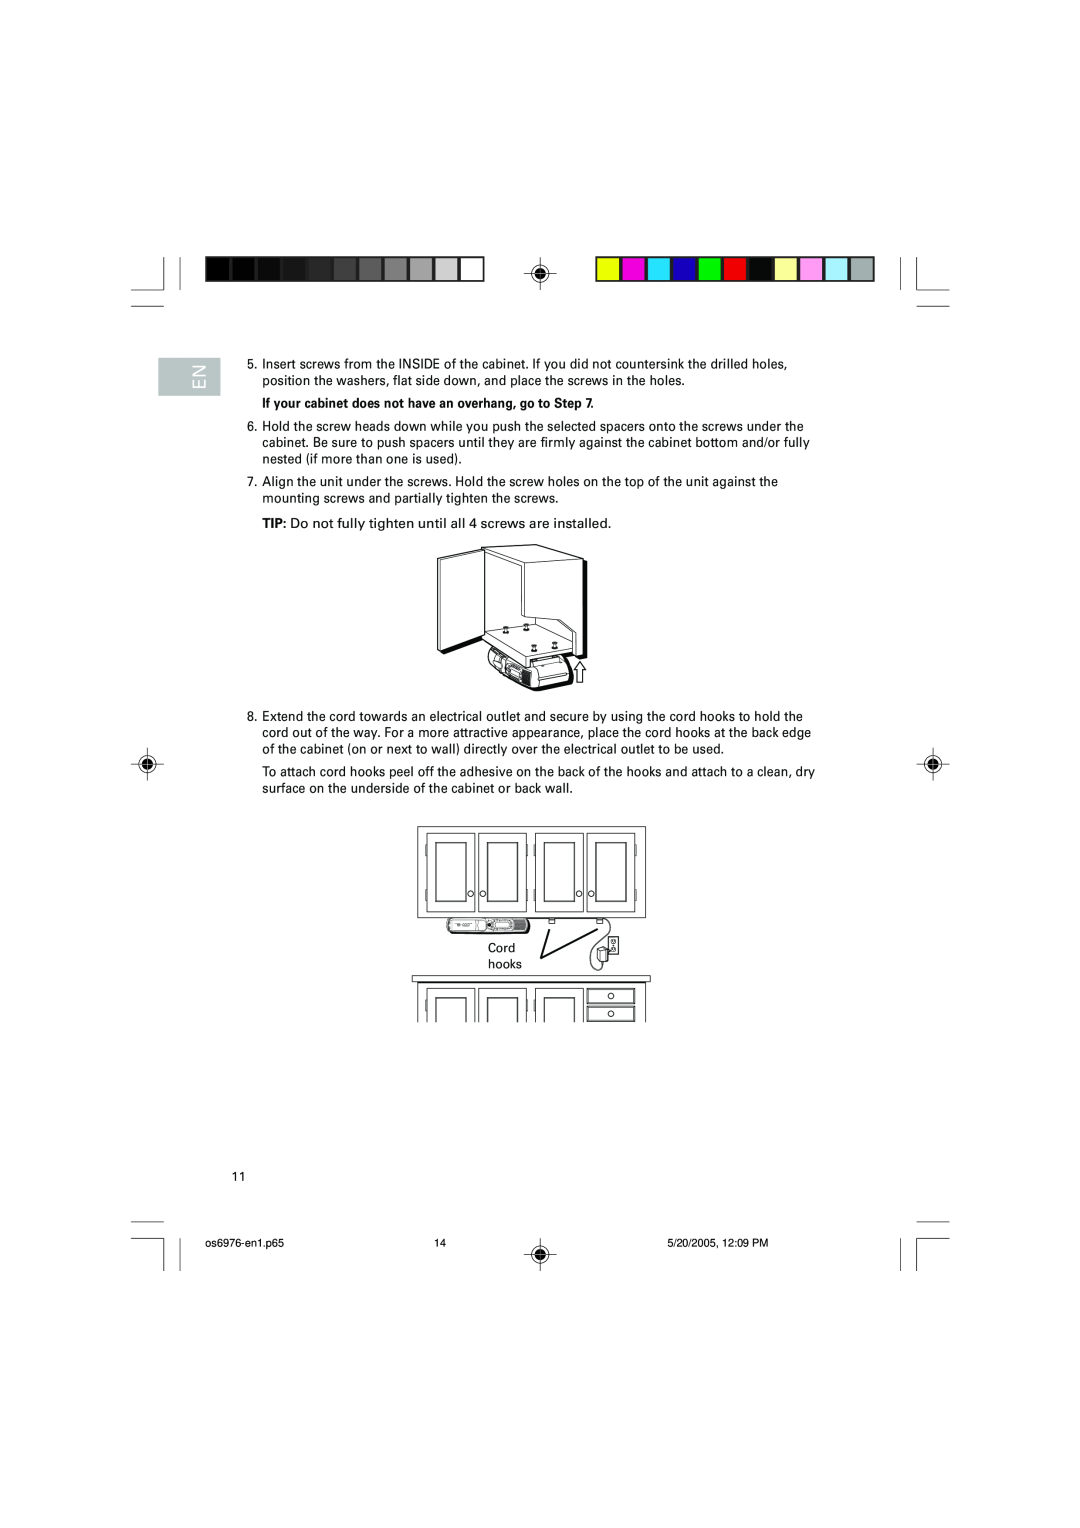 Oregon Scientific OS6976 user manual If your cabinet does not have an overhang, go to Step 